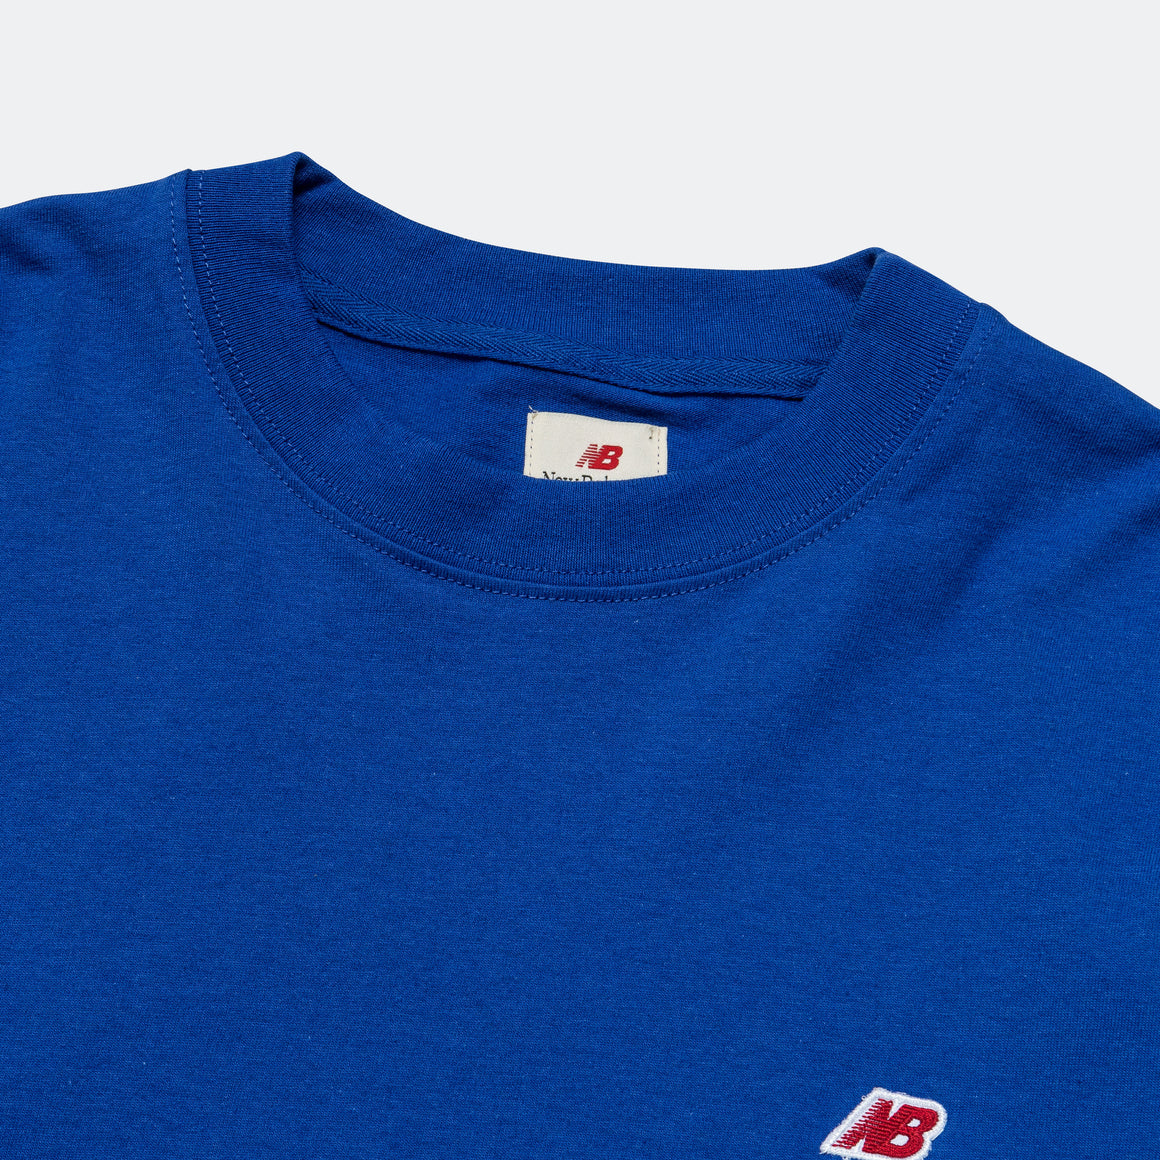 New Balance - MADE in USA Long Sleeve Tee - Royal Blue - UP THERE